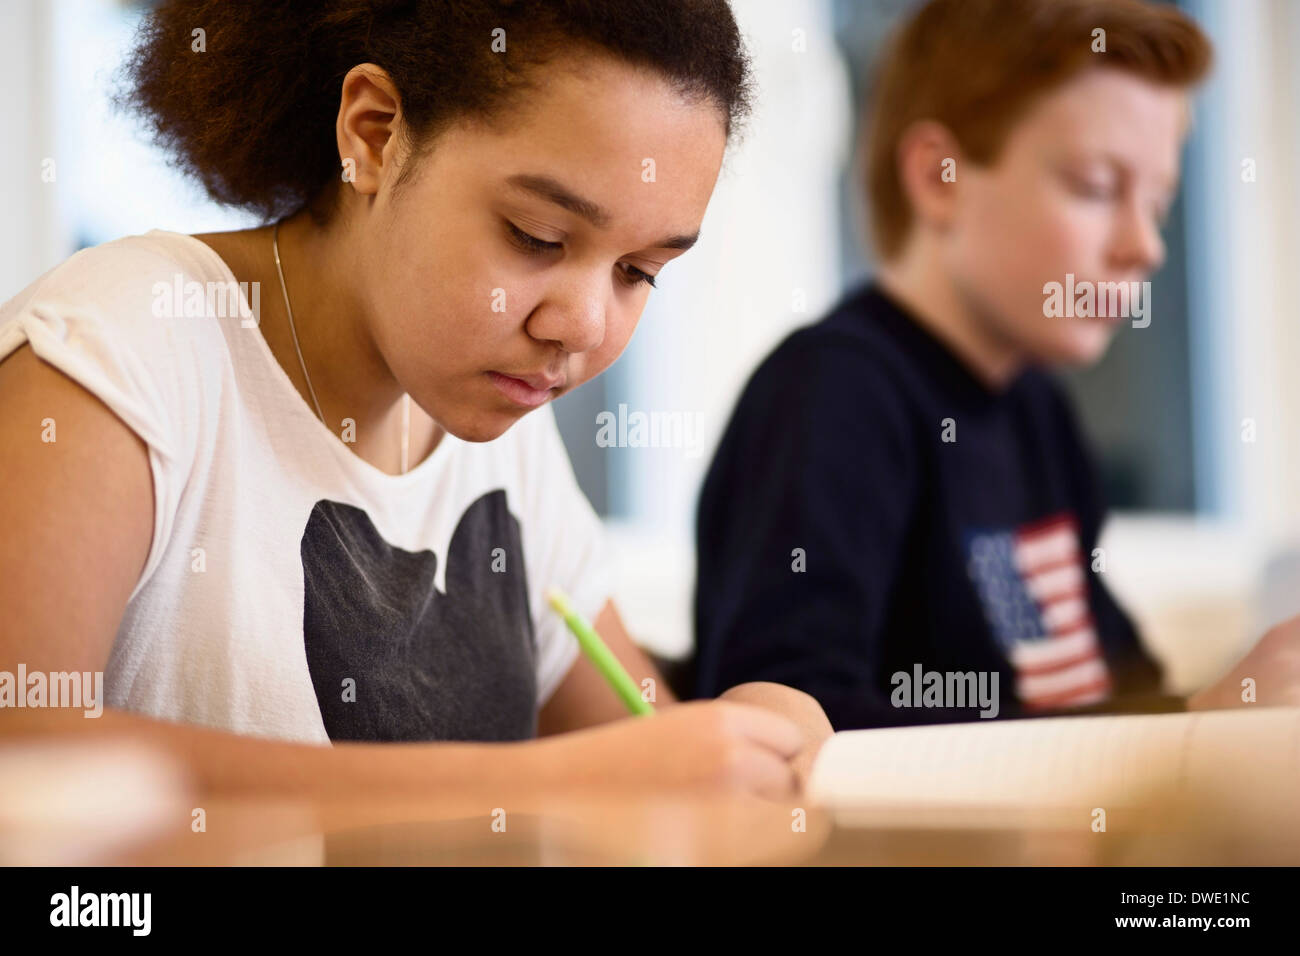 High school girl studying in class Stock Photo